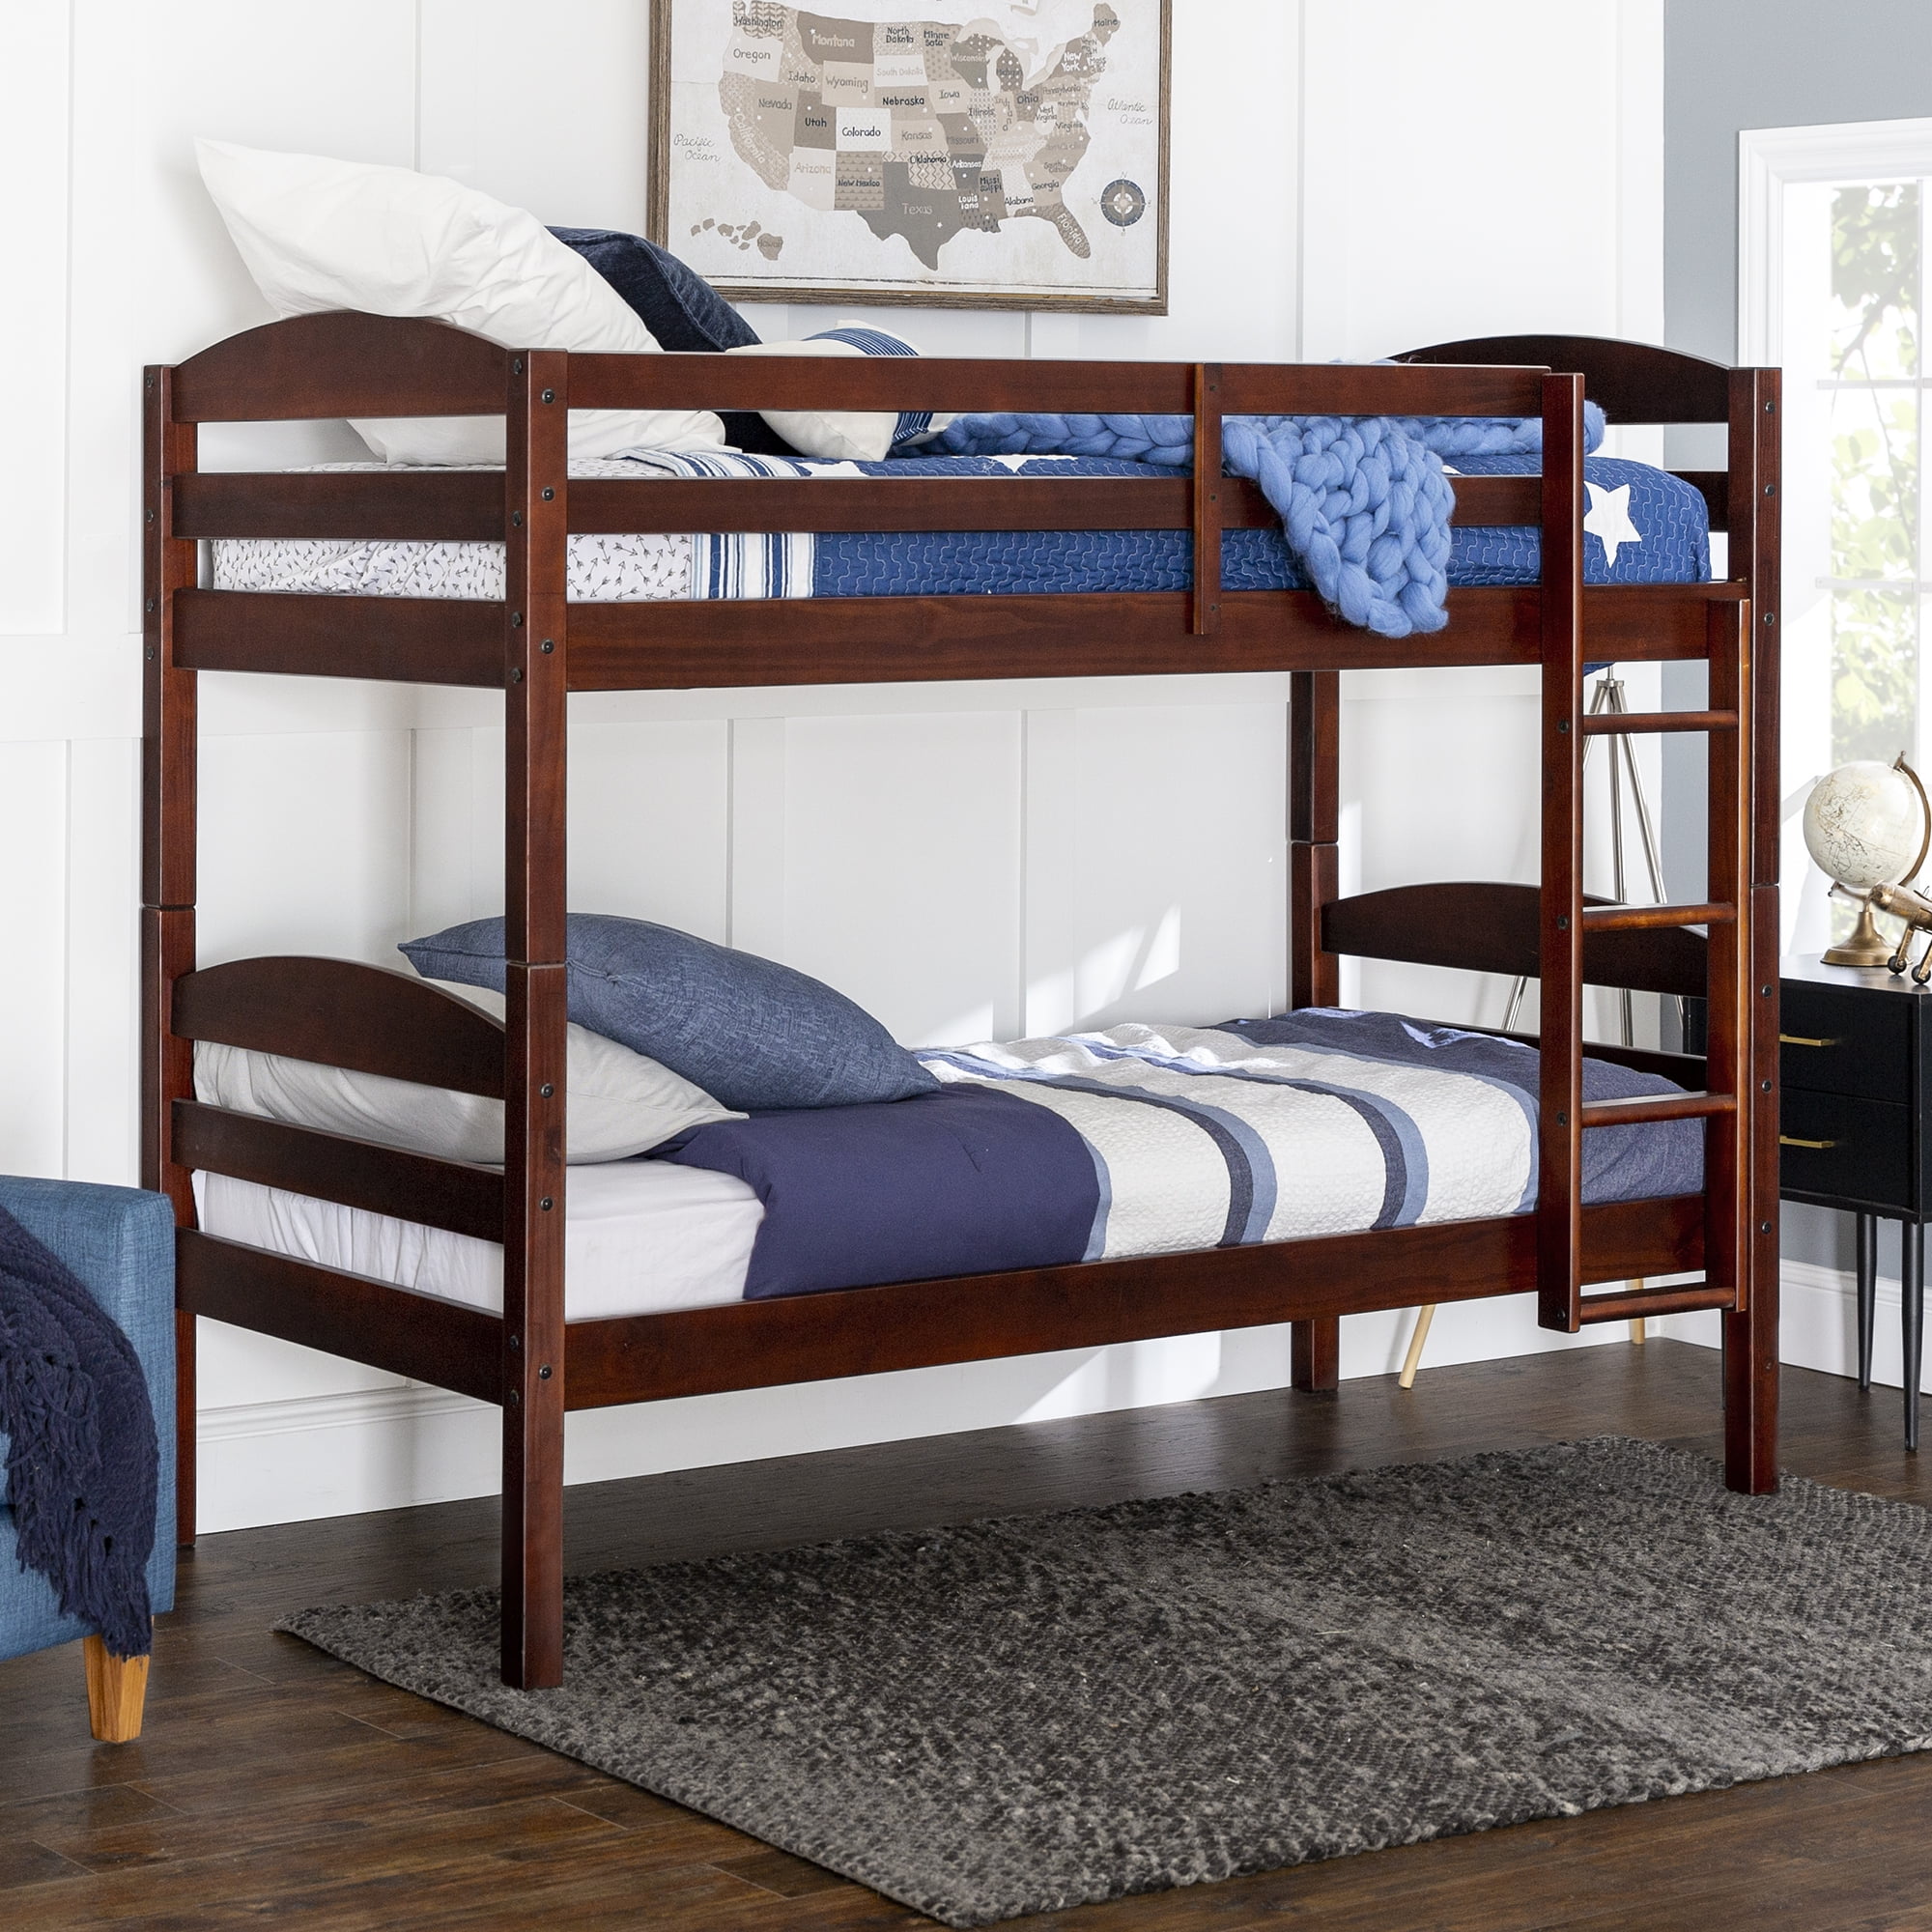 Walker Edison Solid Wood Twin Over, Walker Edison Twin Over Futon Bunk Bed